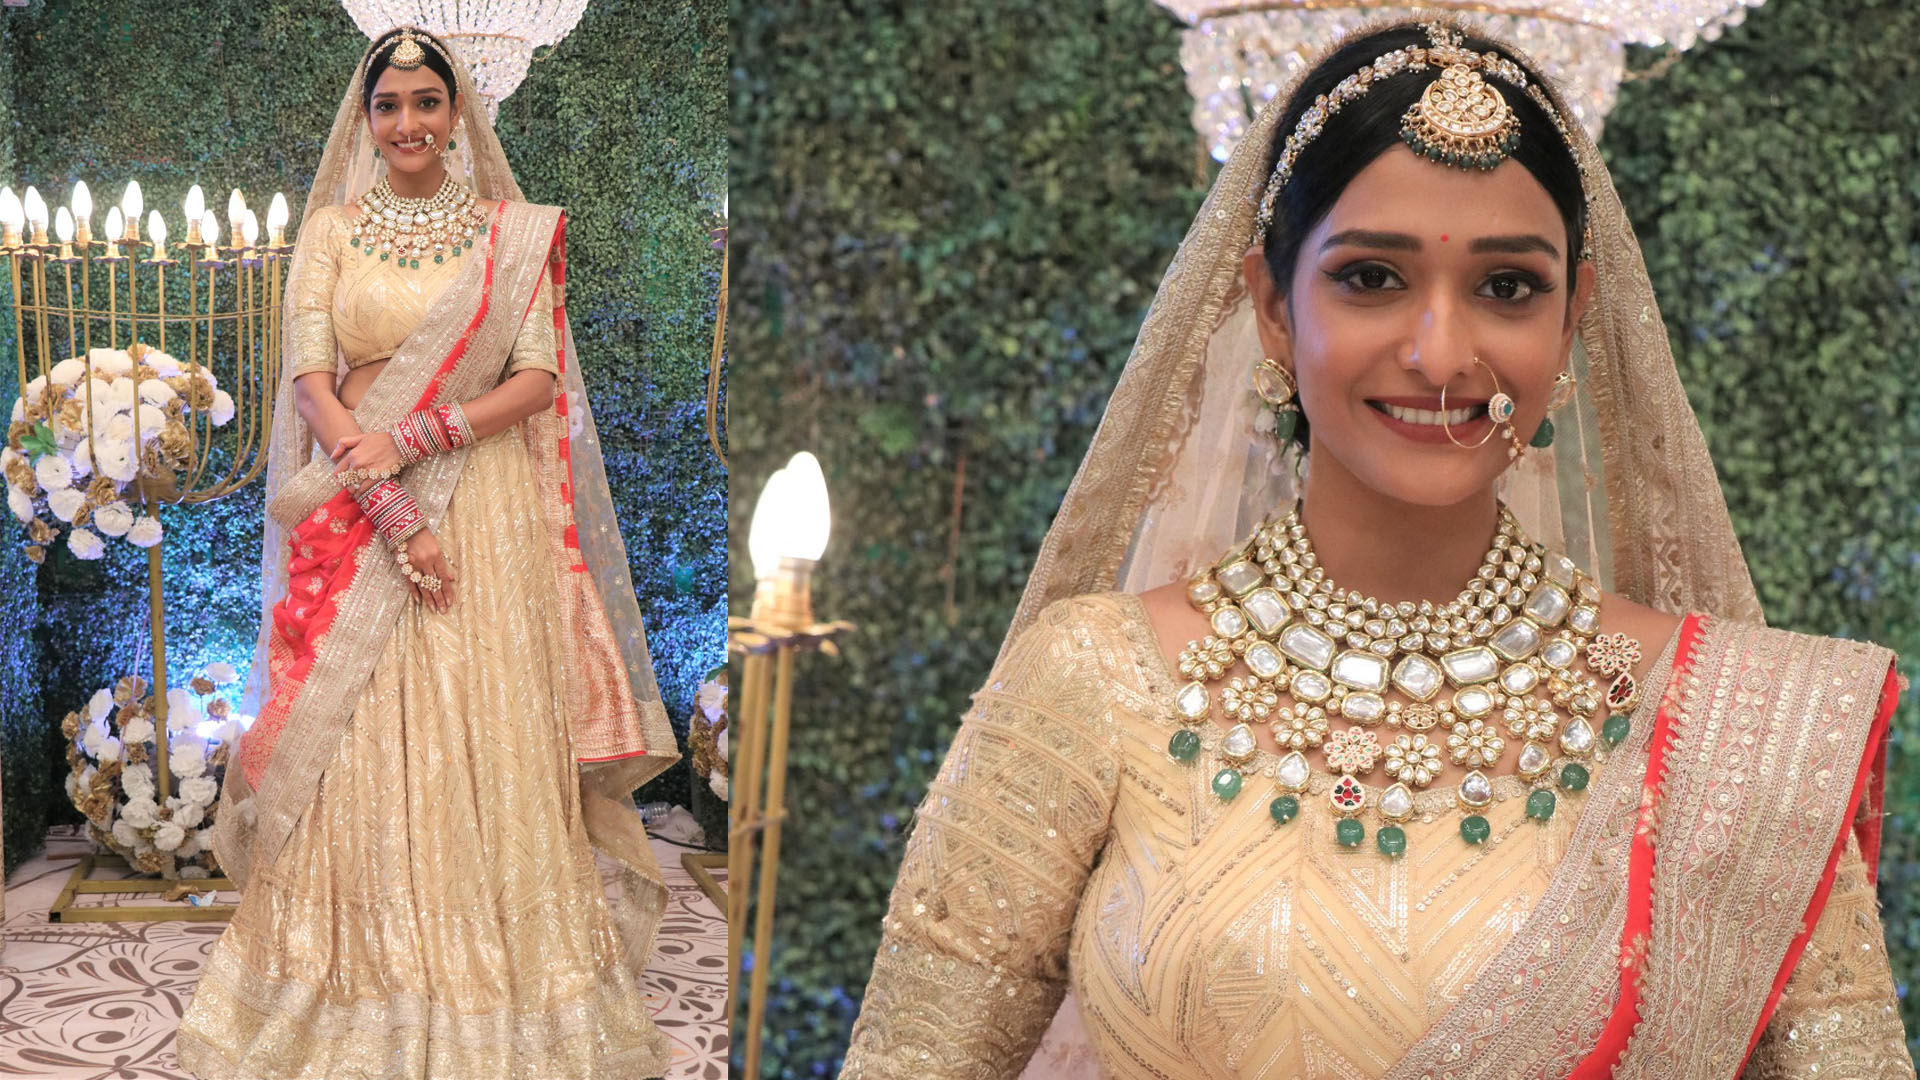 Did you know Aishwarya Khare wore a 20-kg lehenga for a recent wedding sequence in Bhagya Lakshmi?